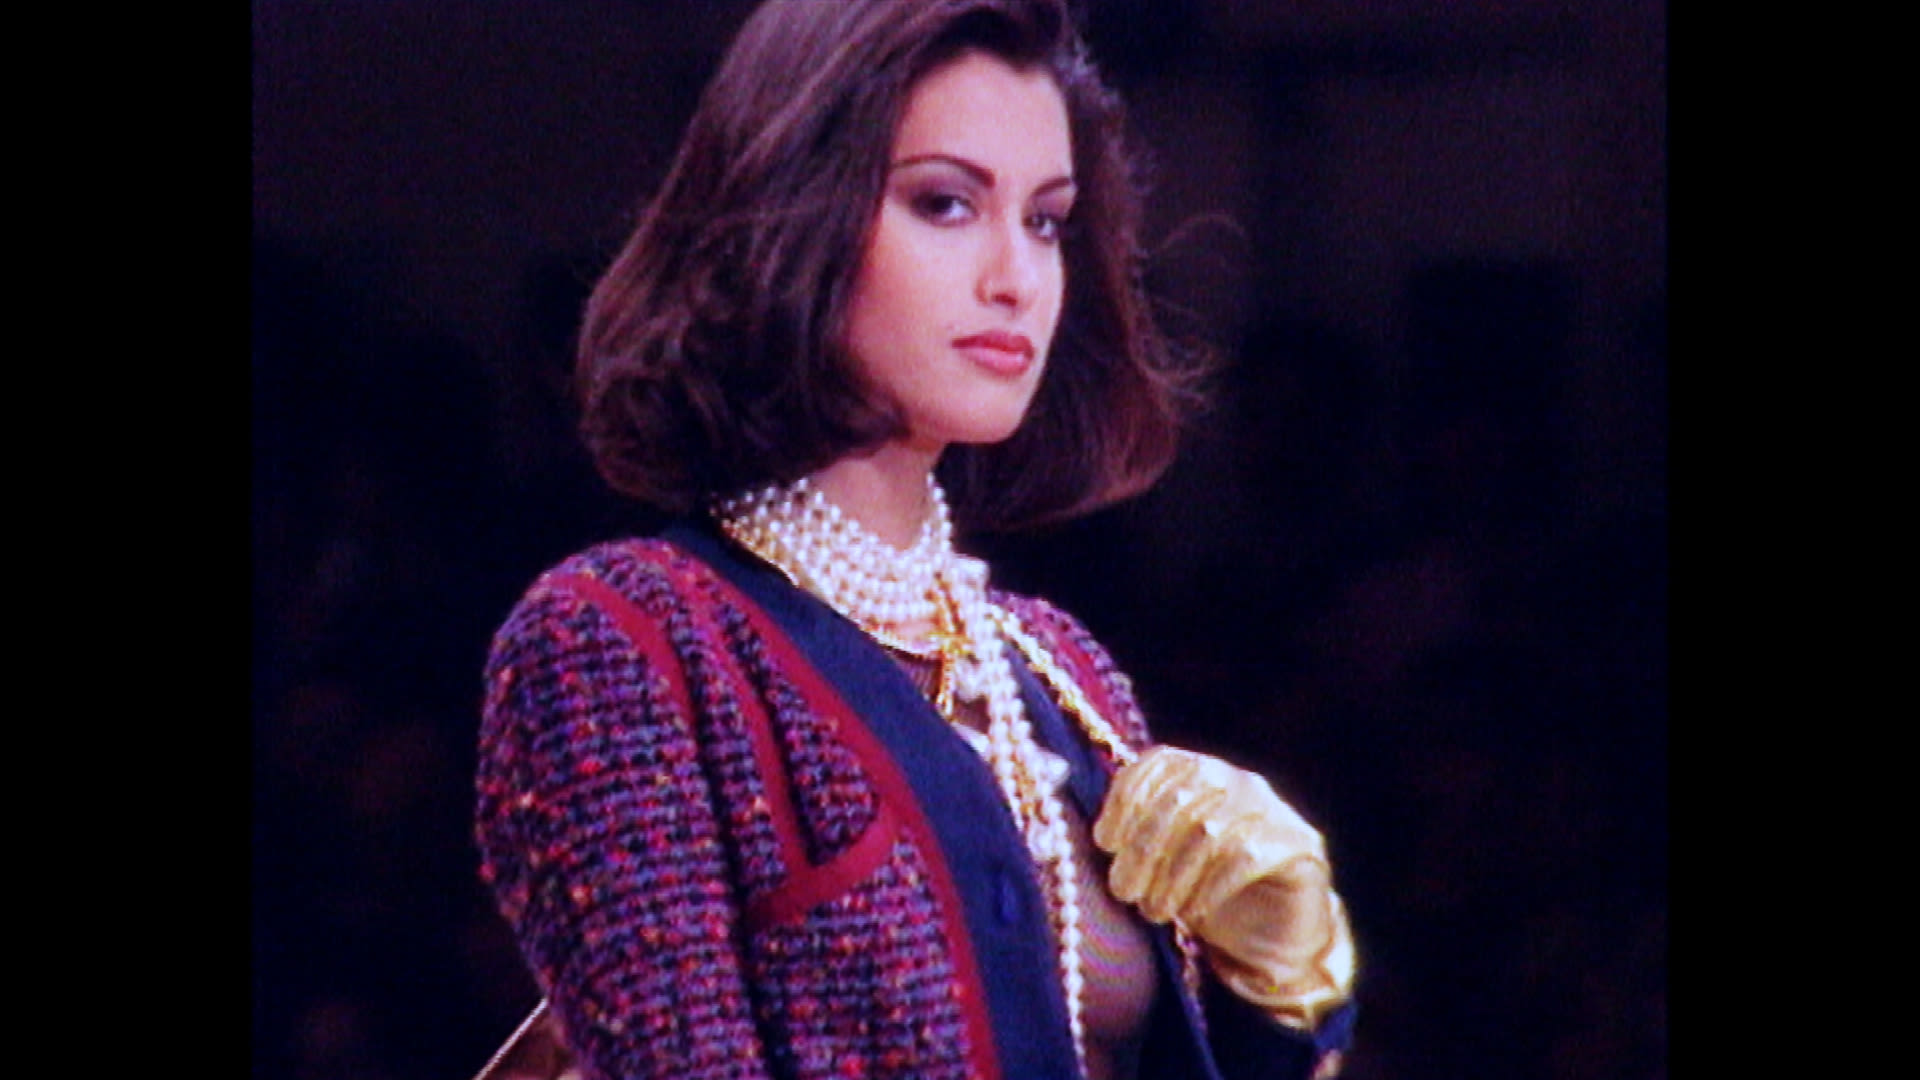 Karl Lagerfeld's Hip-Hop-Inspired Fall 1991 Chanel Show - #TBT